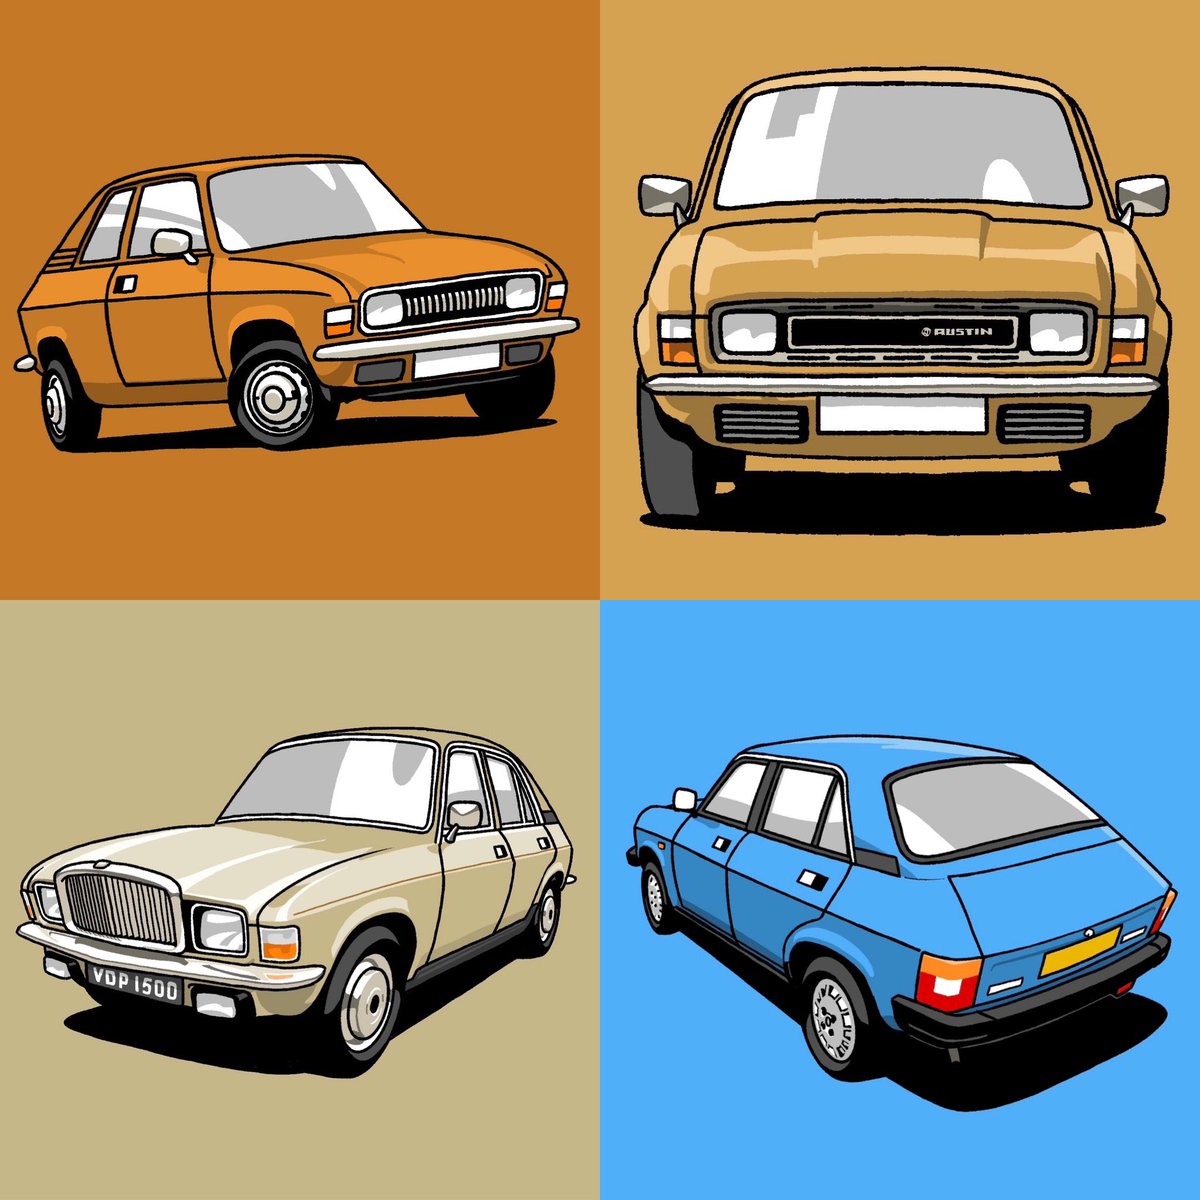 50 today - the Austin Allegro! Launched May 17, 1973. From my #carsofbritishleyland series (it’s actually the 18th here in Australia, where the Allegro was never sold)

#austin #allegro #austinallegro #britishleyland